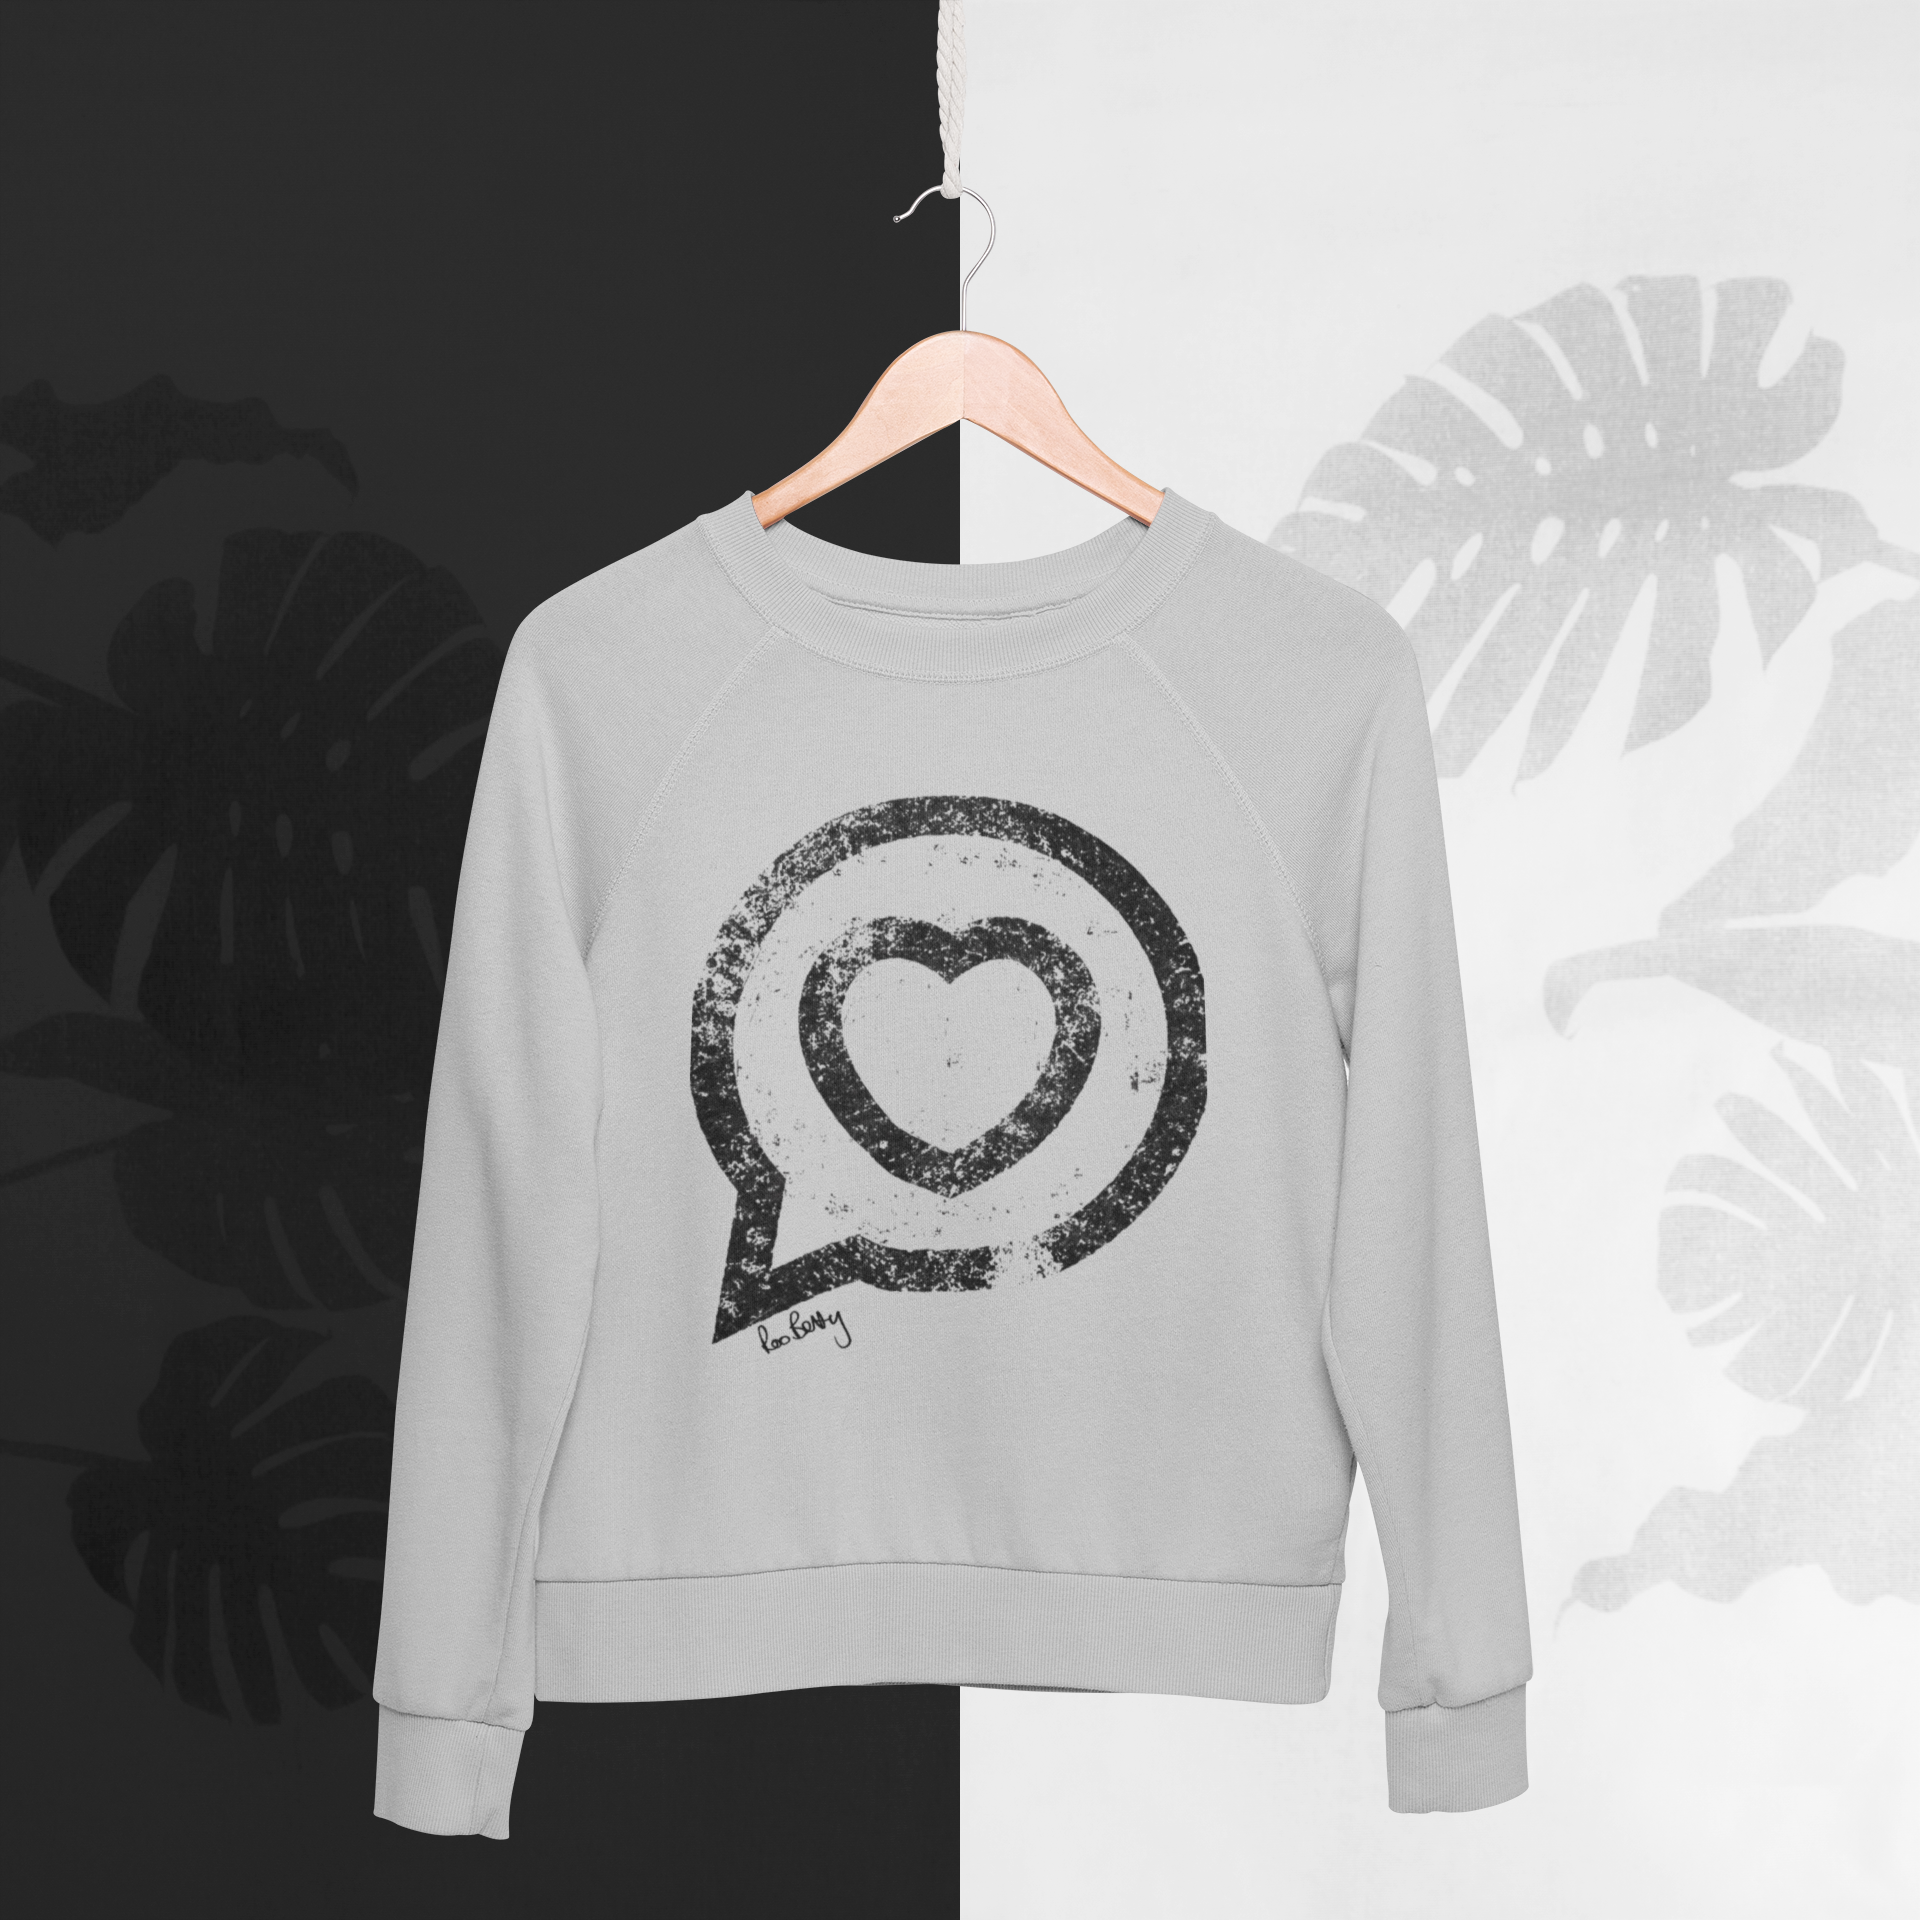 Greay Ambassador Sweatshirt with Black vintage logo of a heart in a speech bubble on a black and white background 